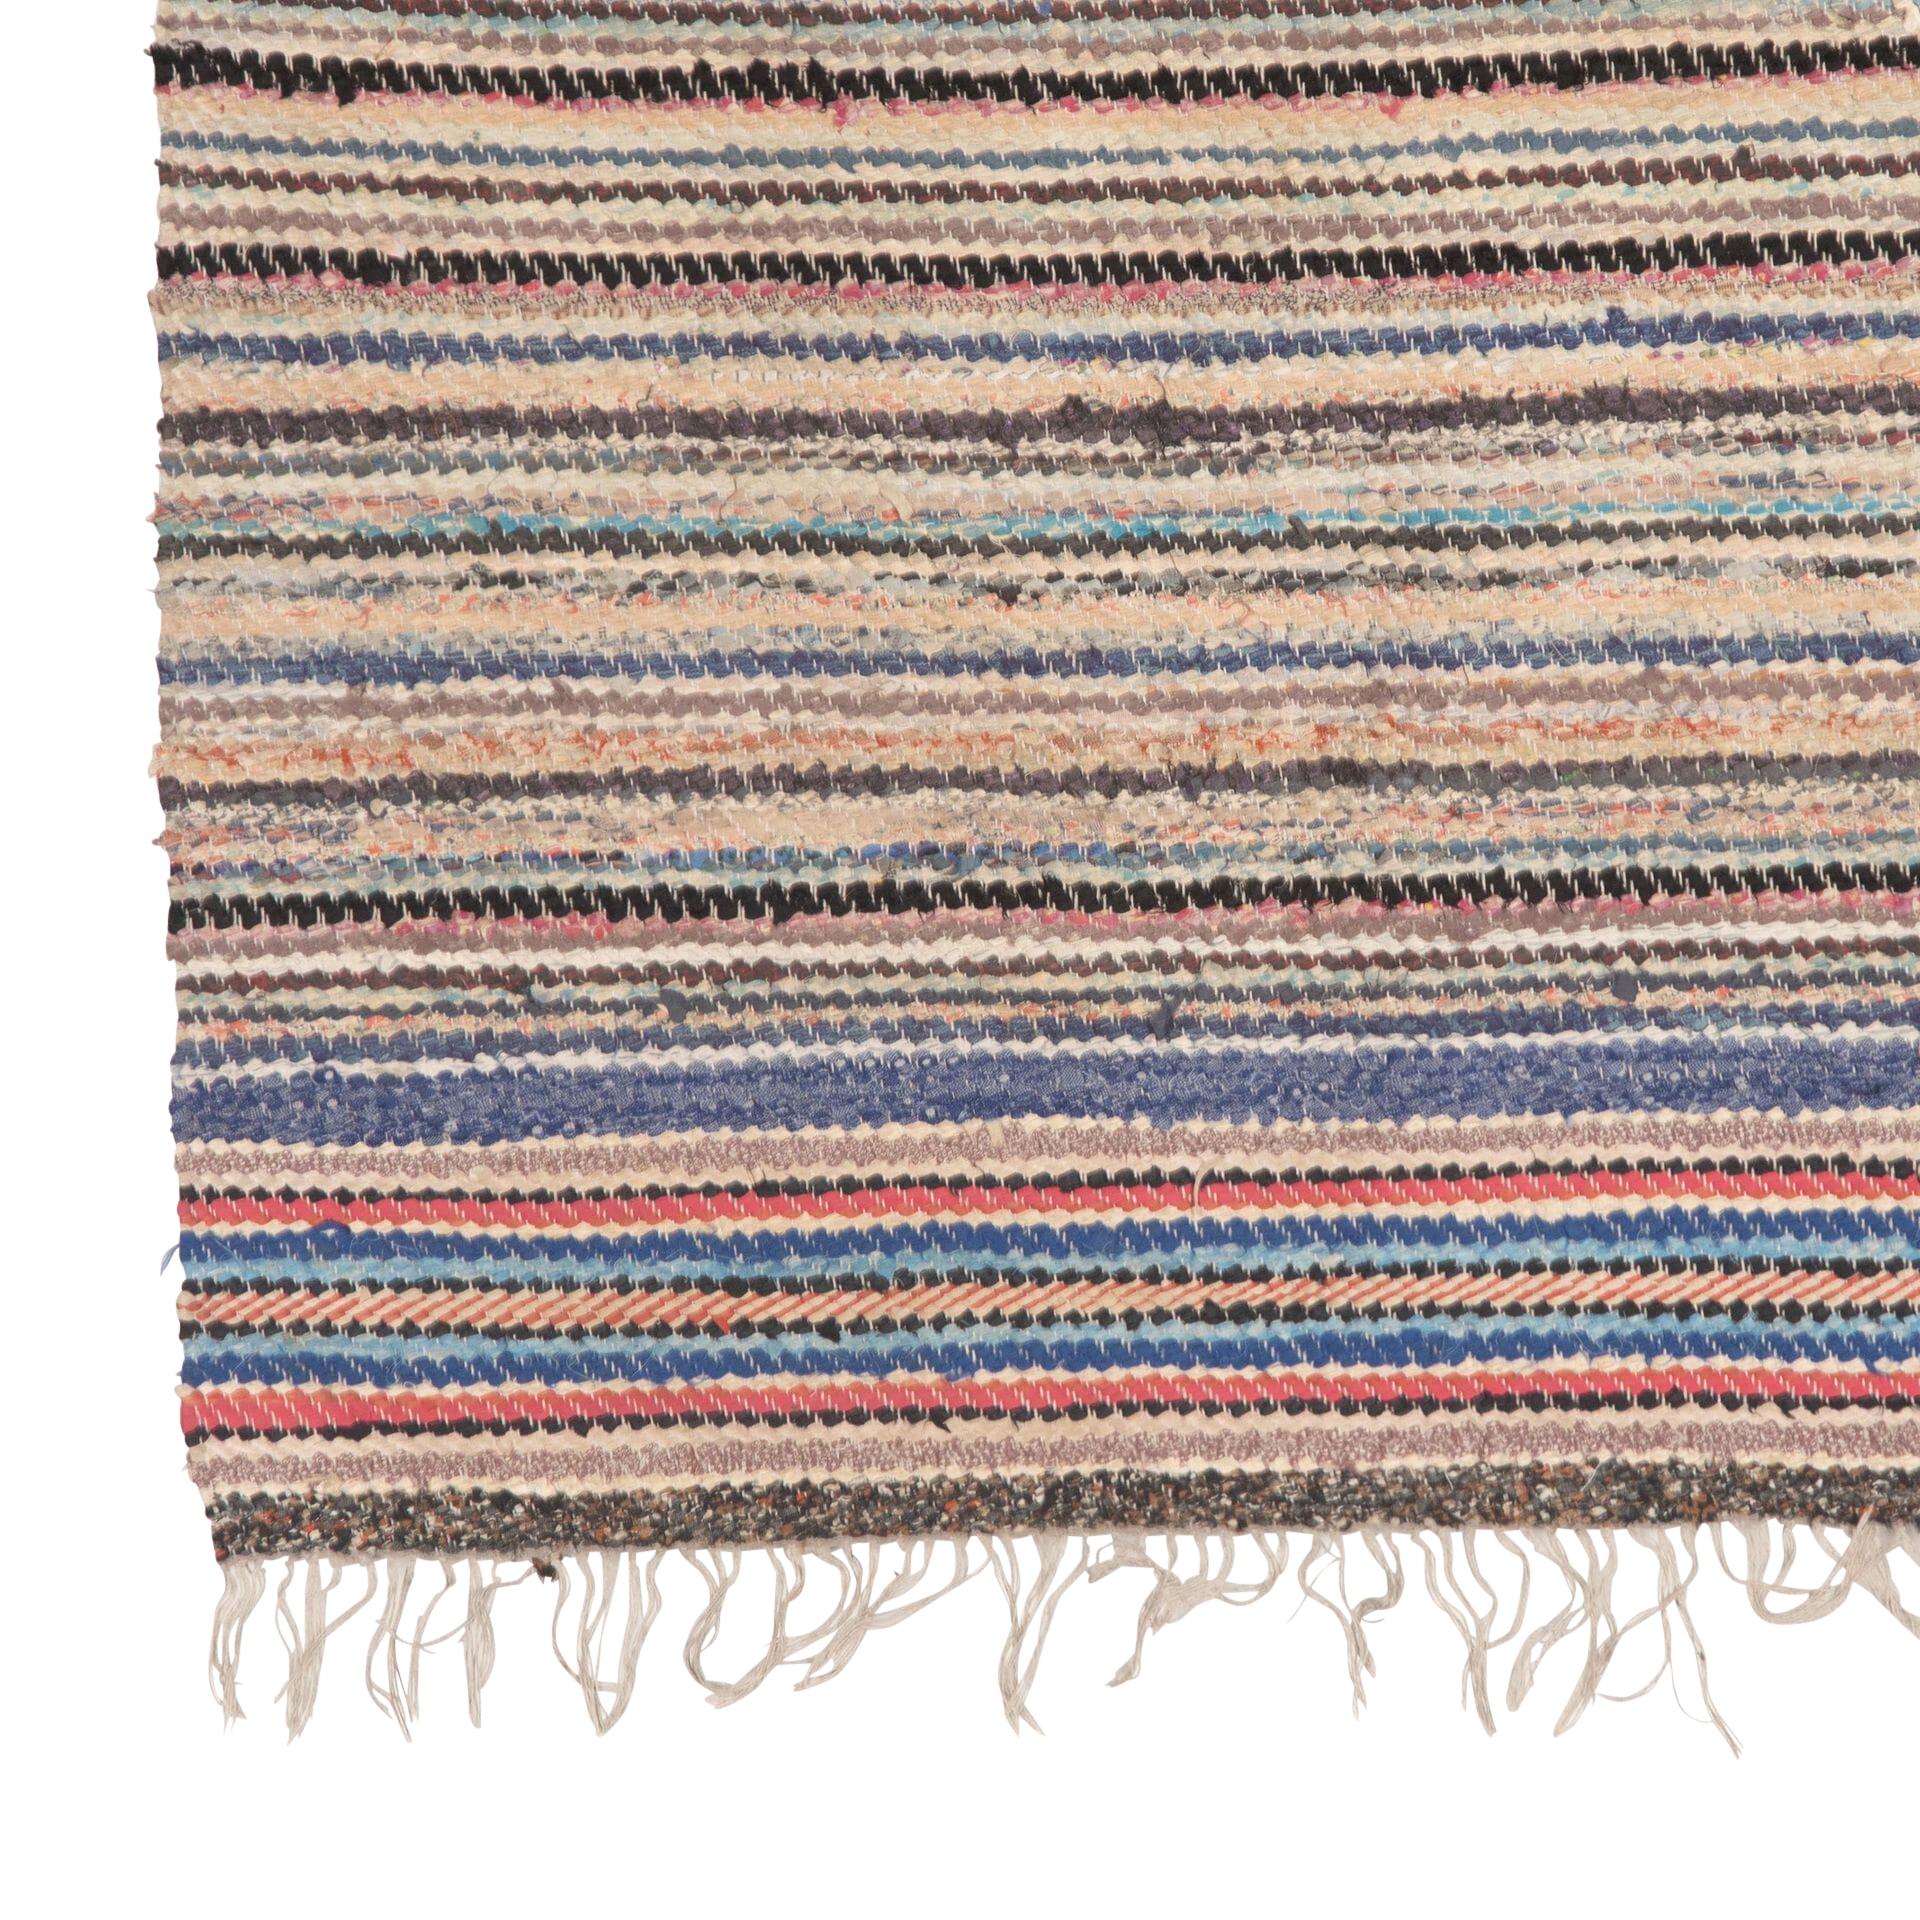 Traditional 20th Century Swedish rug in blue, pink, black and grey. 
With a striped design throughout. 